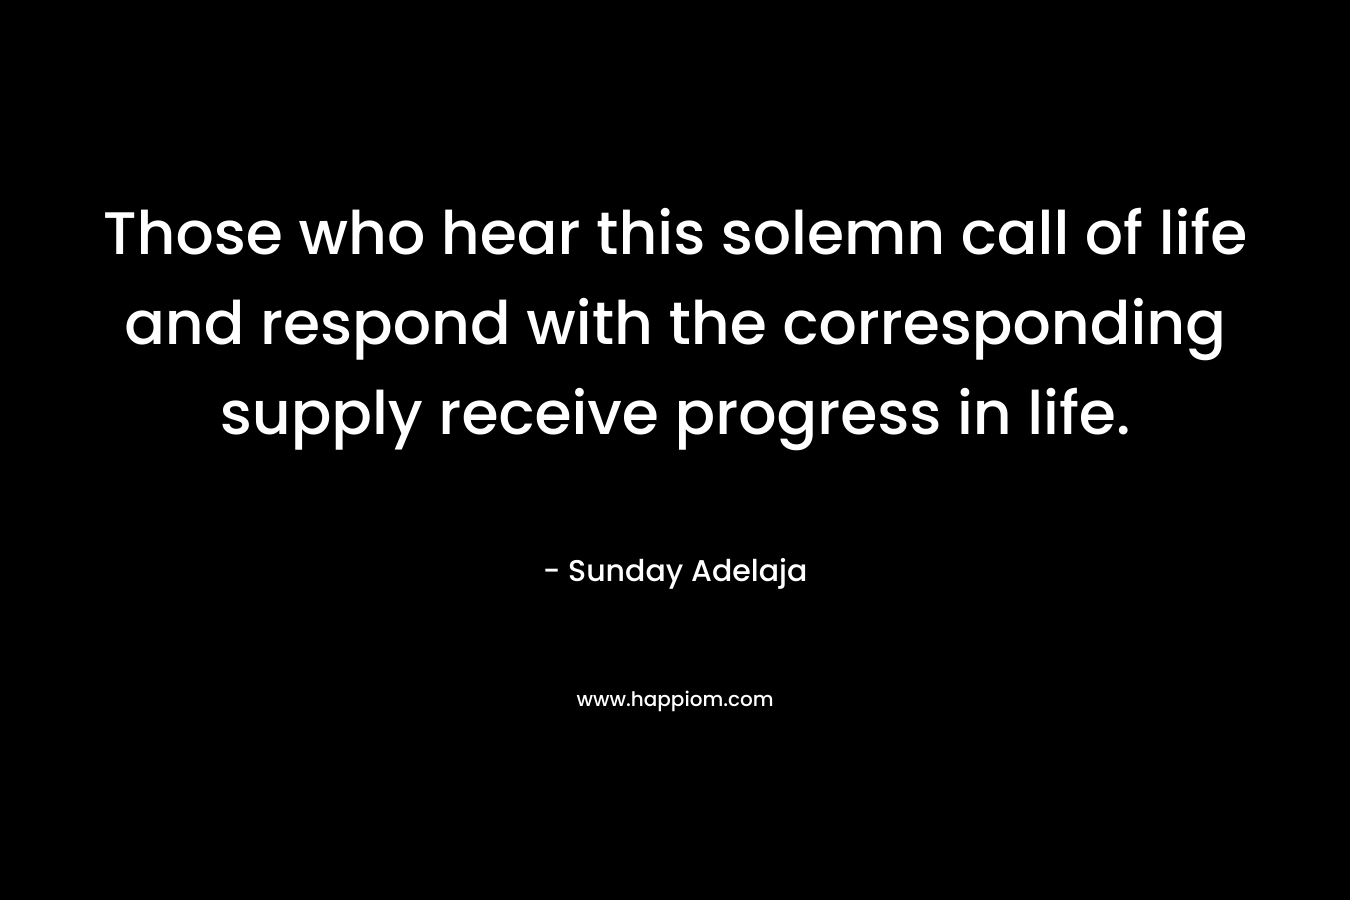 Those who hear this solemn call of life and respond with the corresponding supply receive progress in life. – Sunday Adelaja